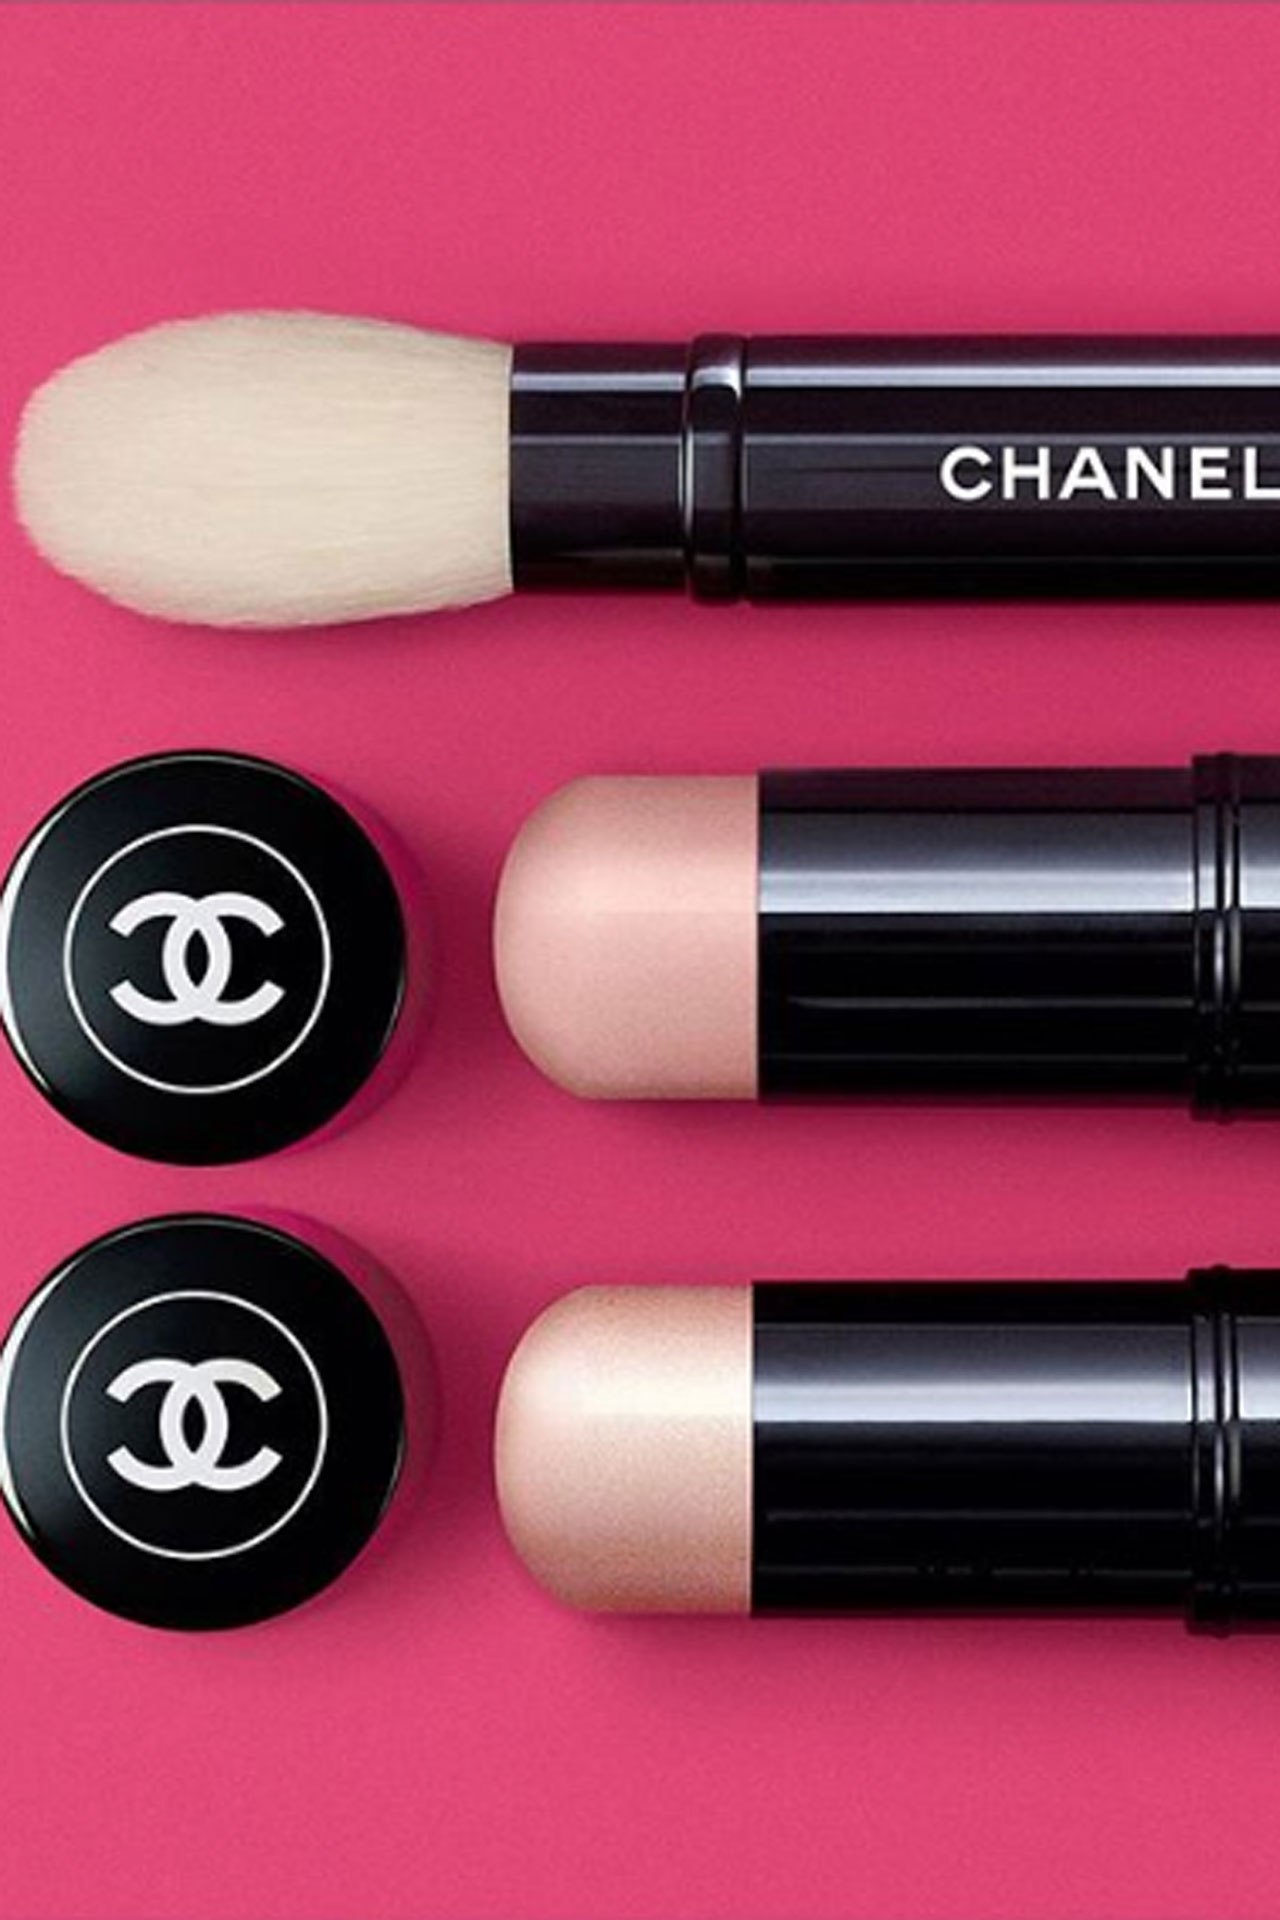 Road test: Chanel's newest beauty product is the best highlighter